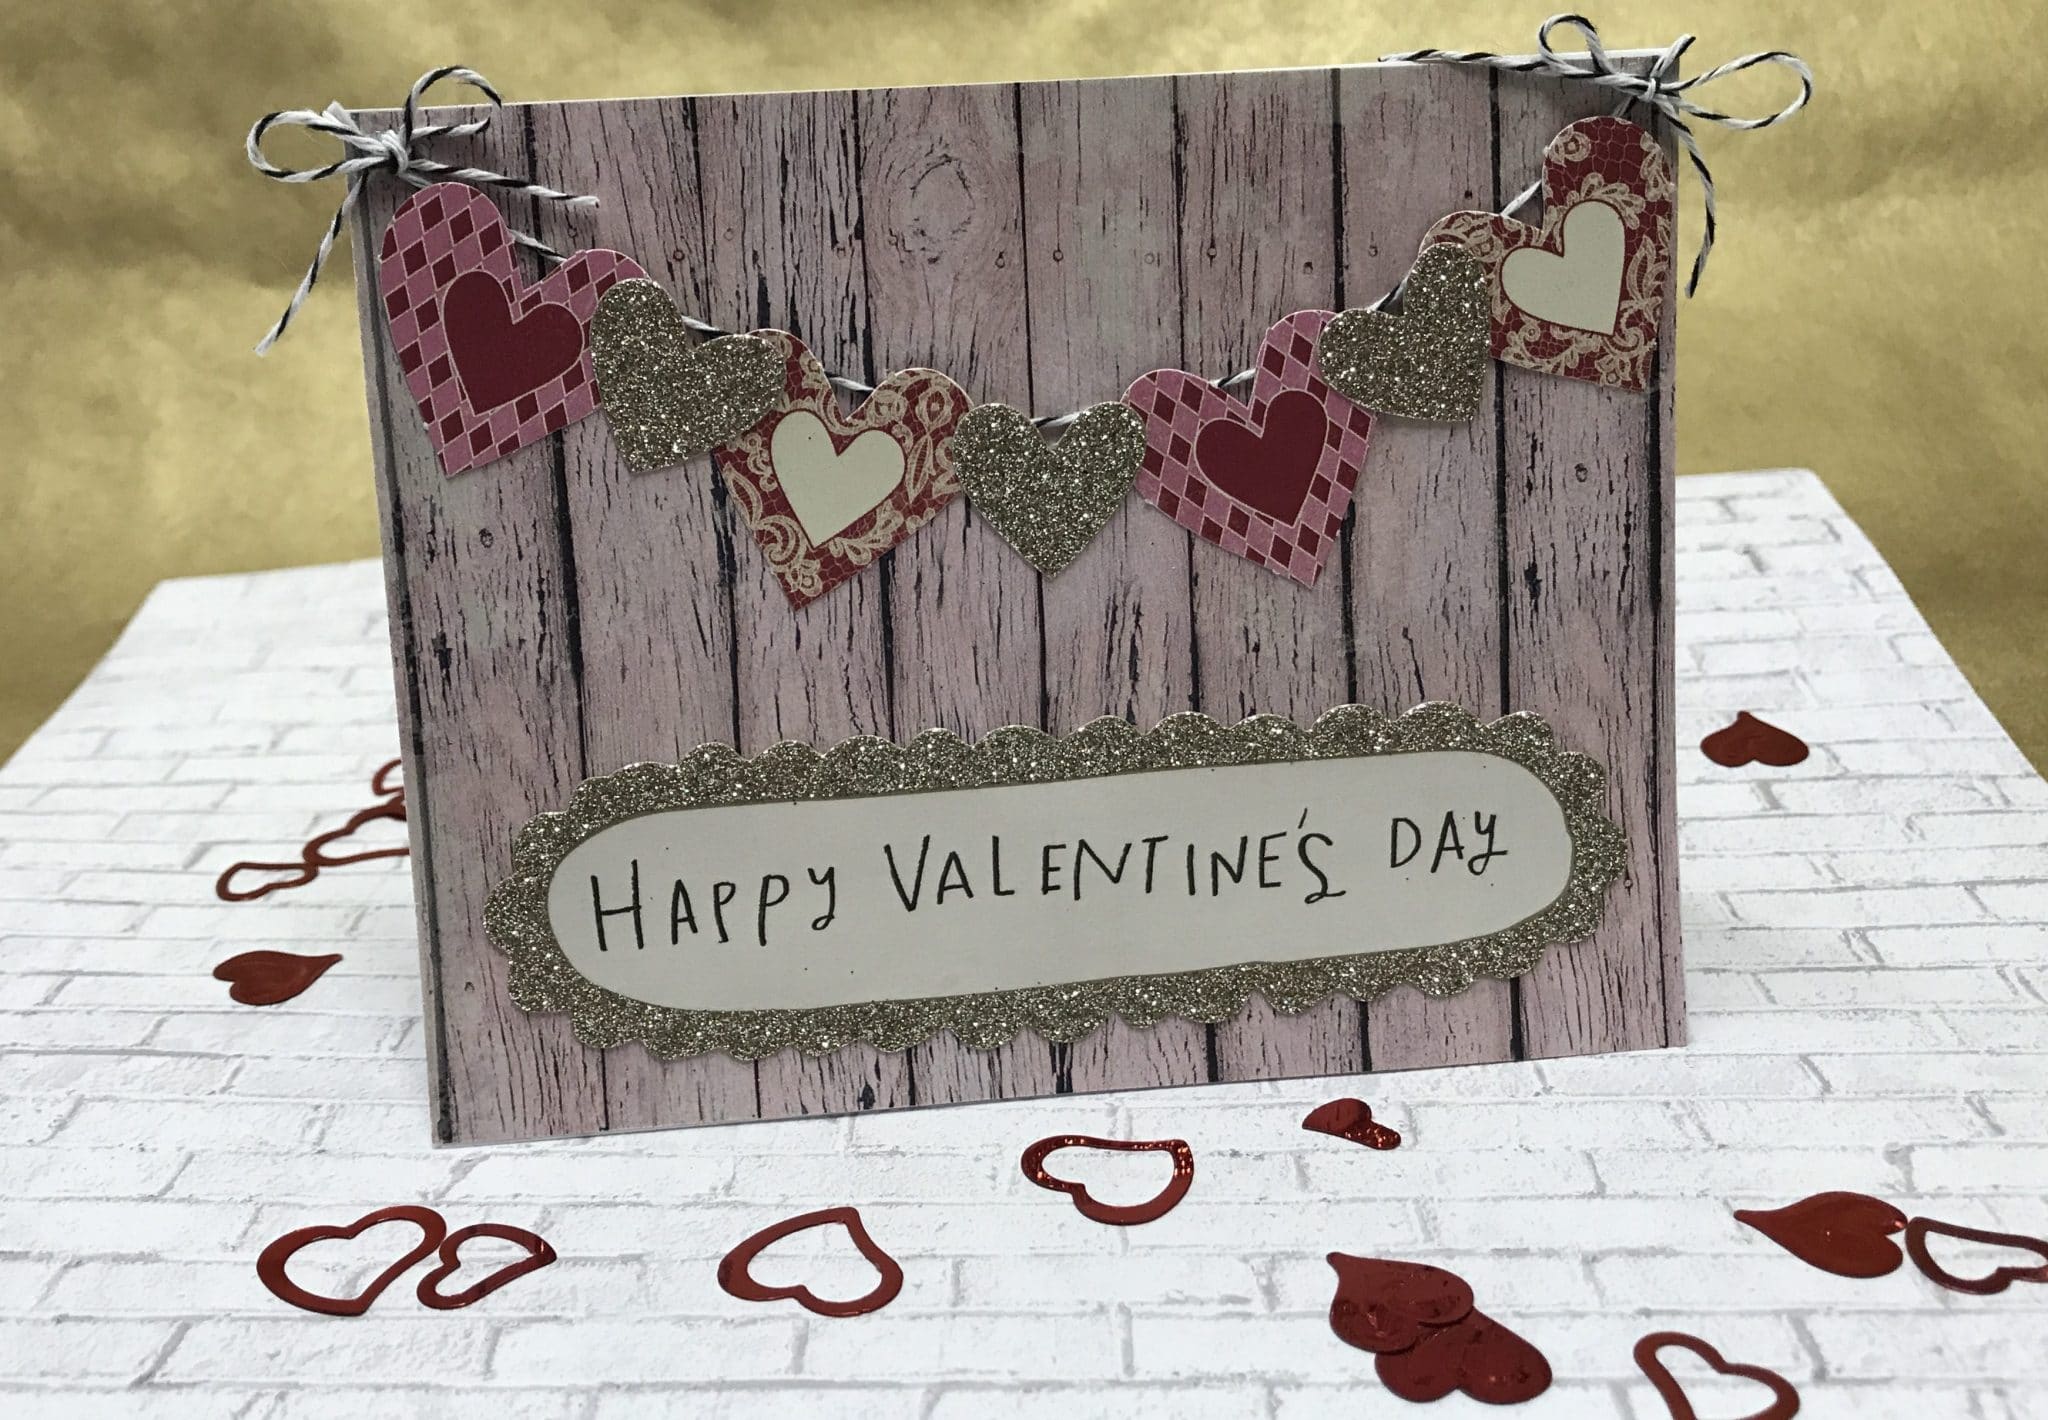 8 Homemade Valentine’s Day Cards